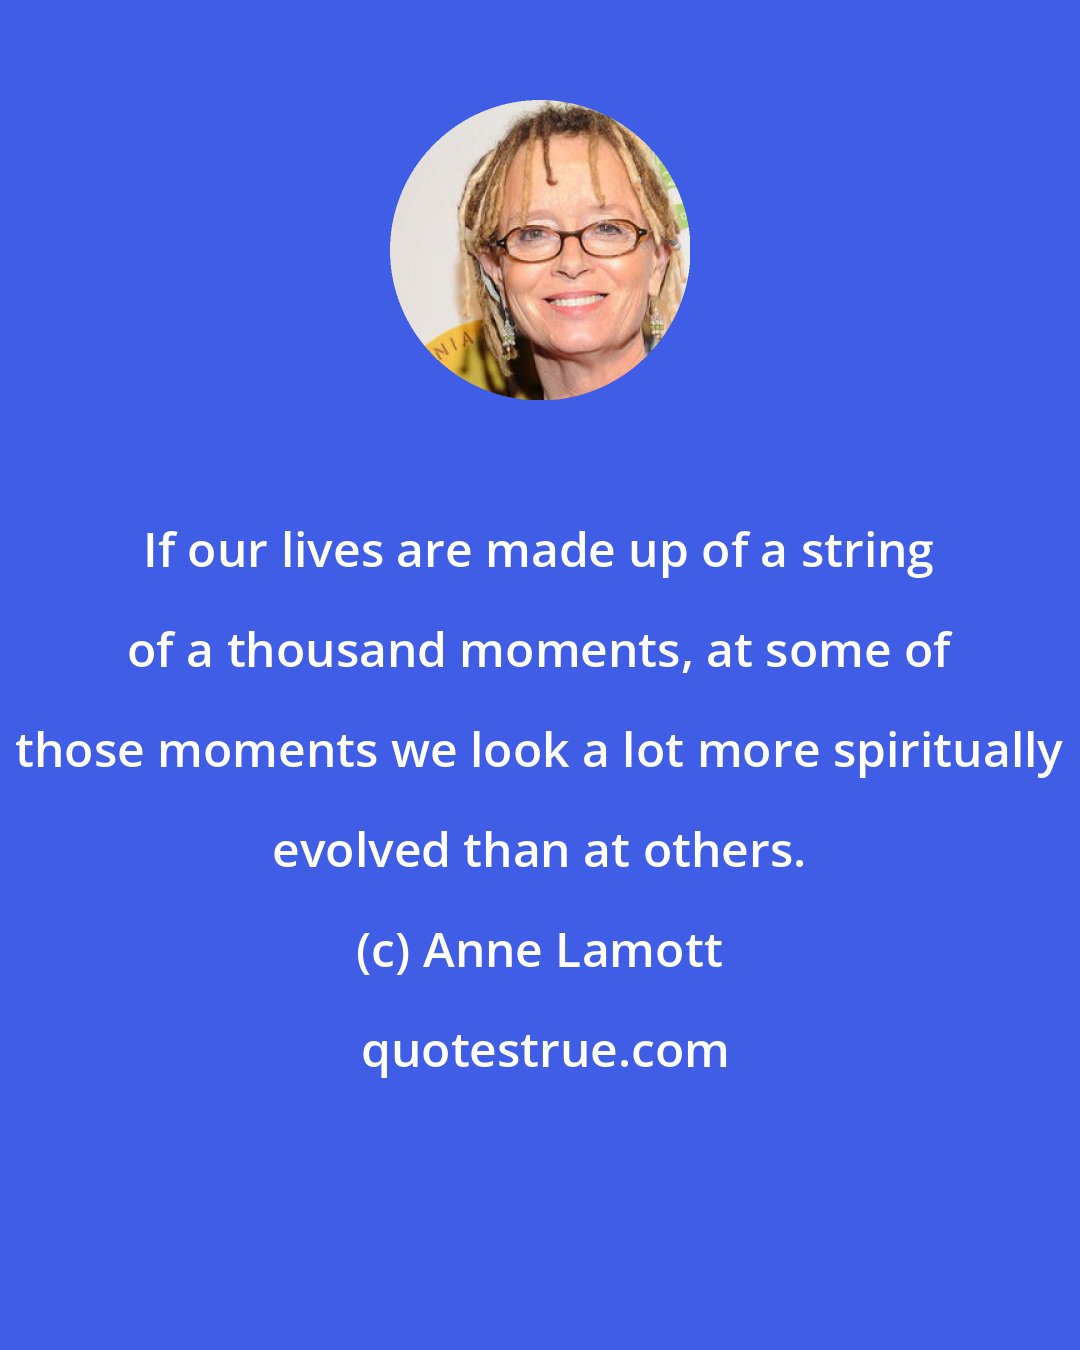 Anne Lamott: If our lives are made up of a string of a thousand moments, at some of those moments we look a lot more spiritually evolved than at others.